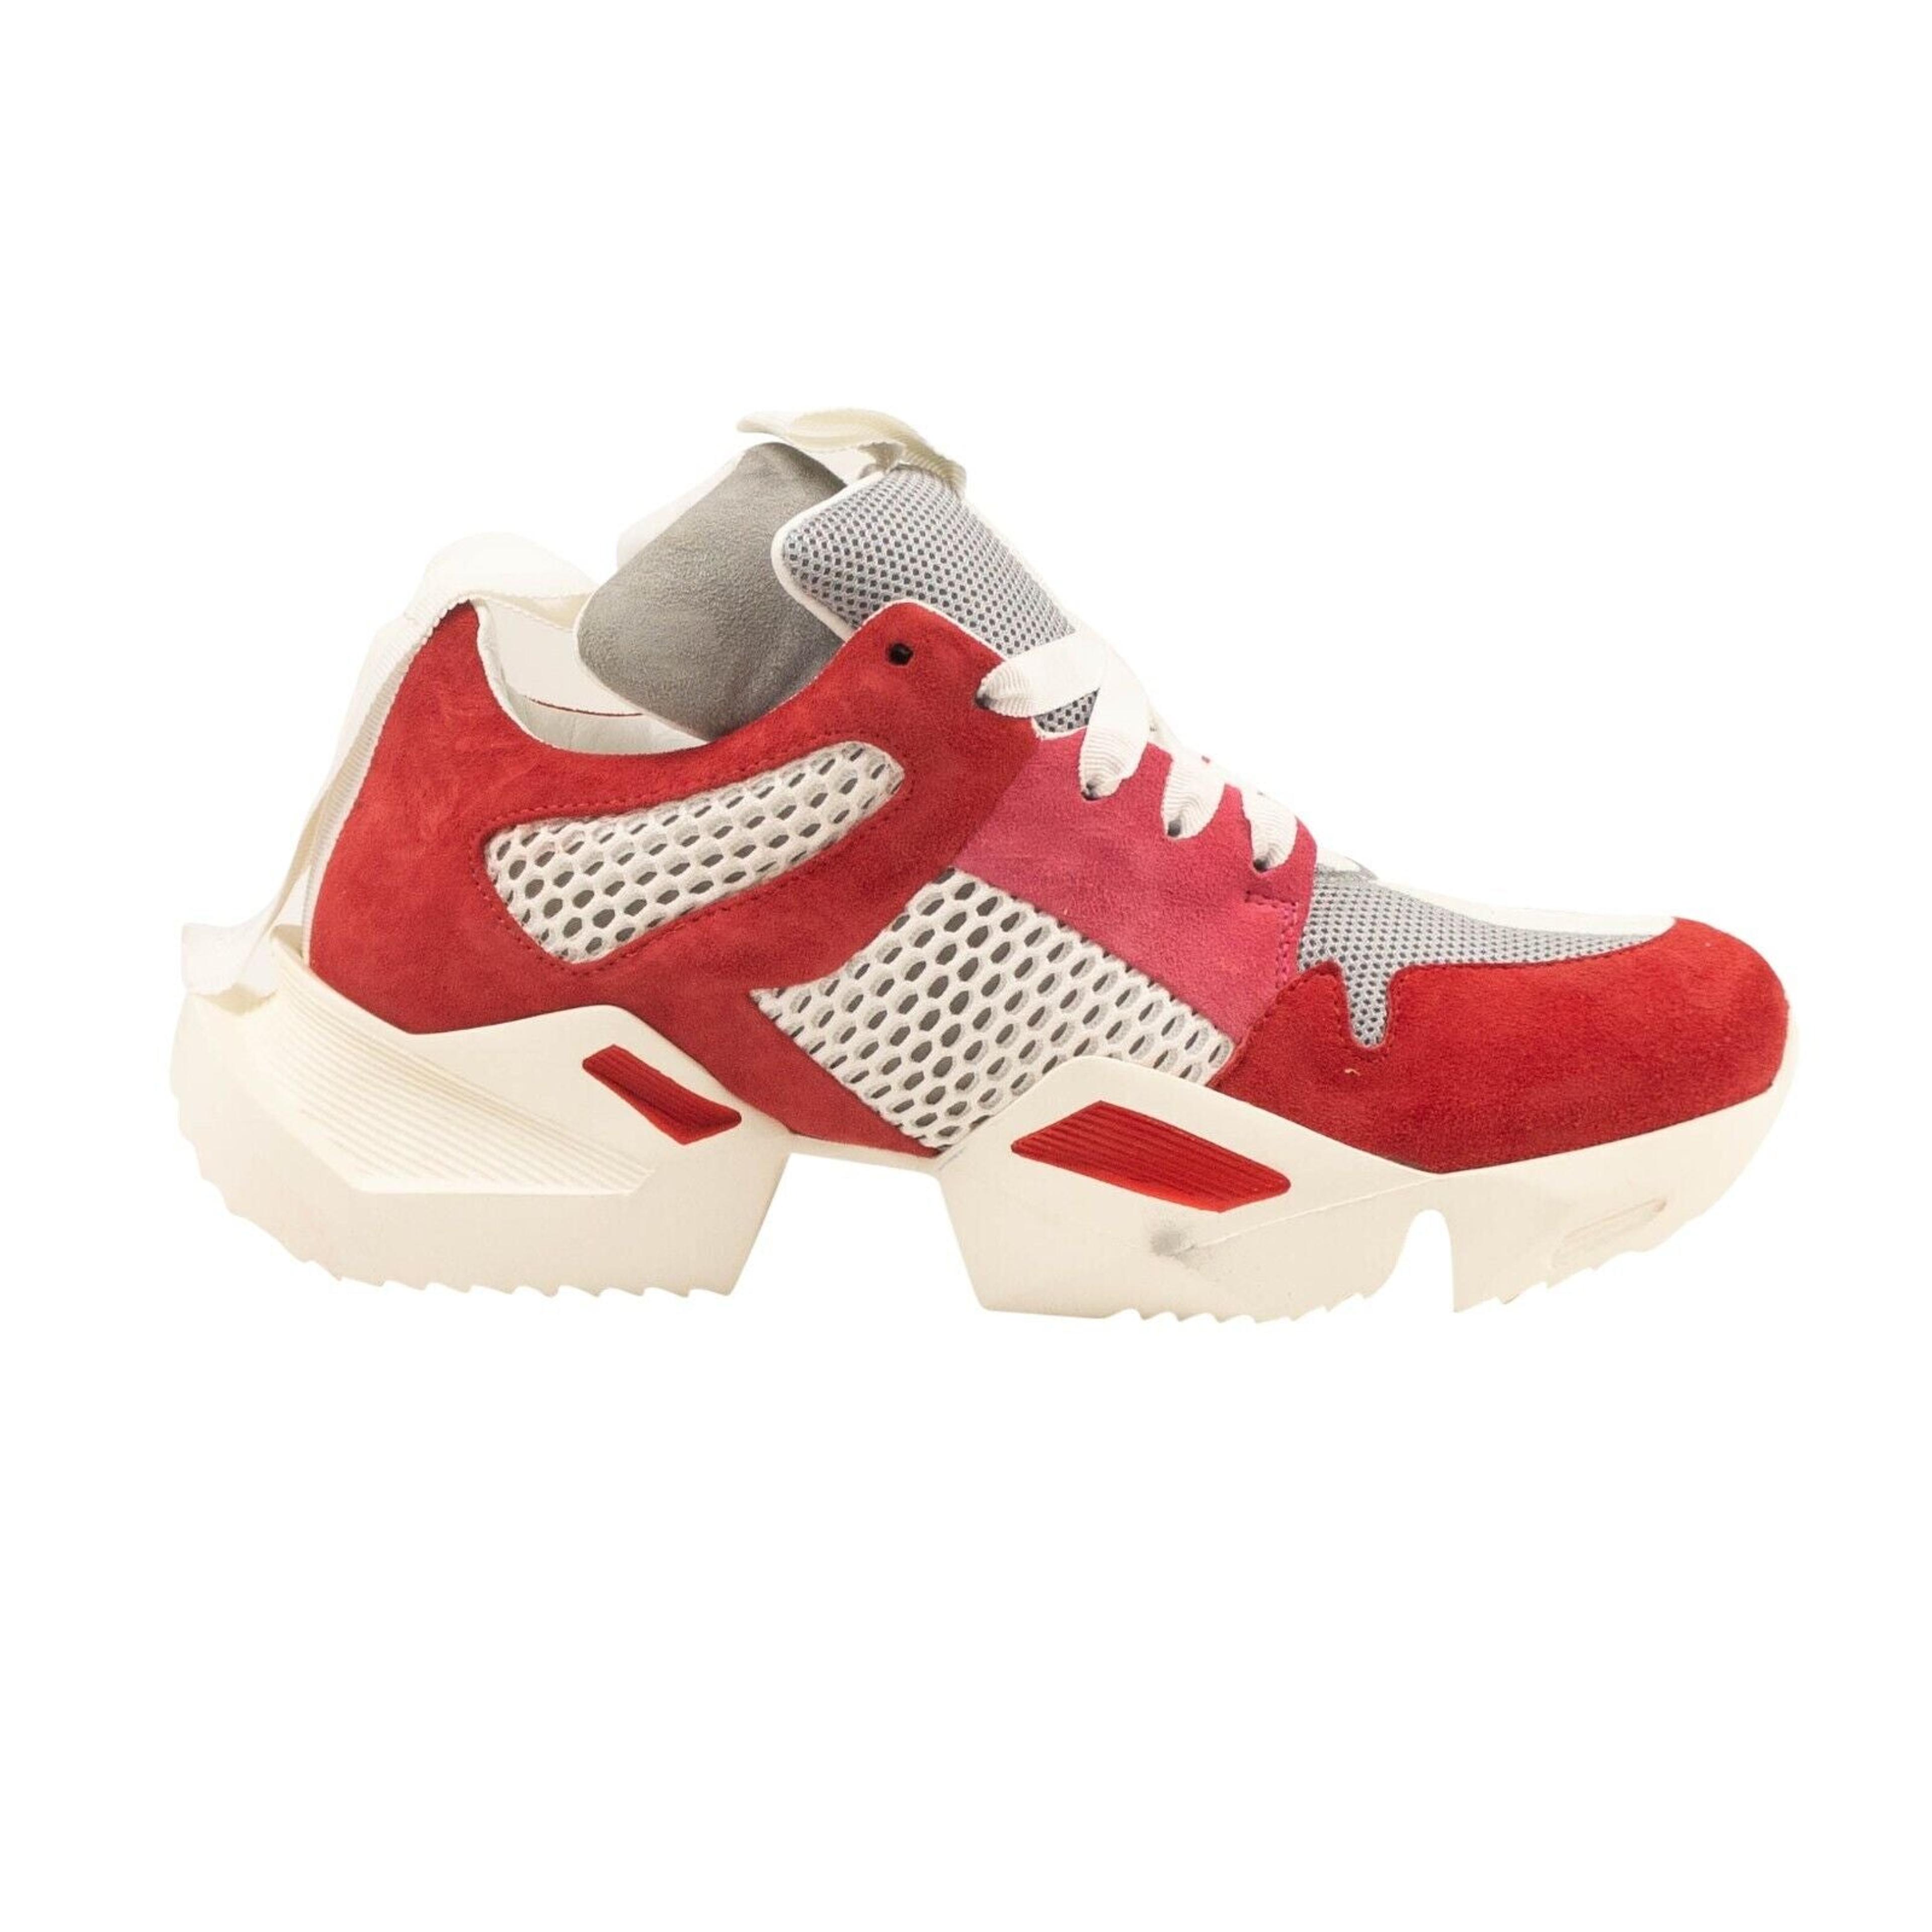 Red, Pink And Grey Mesh Suede Sneakers